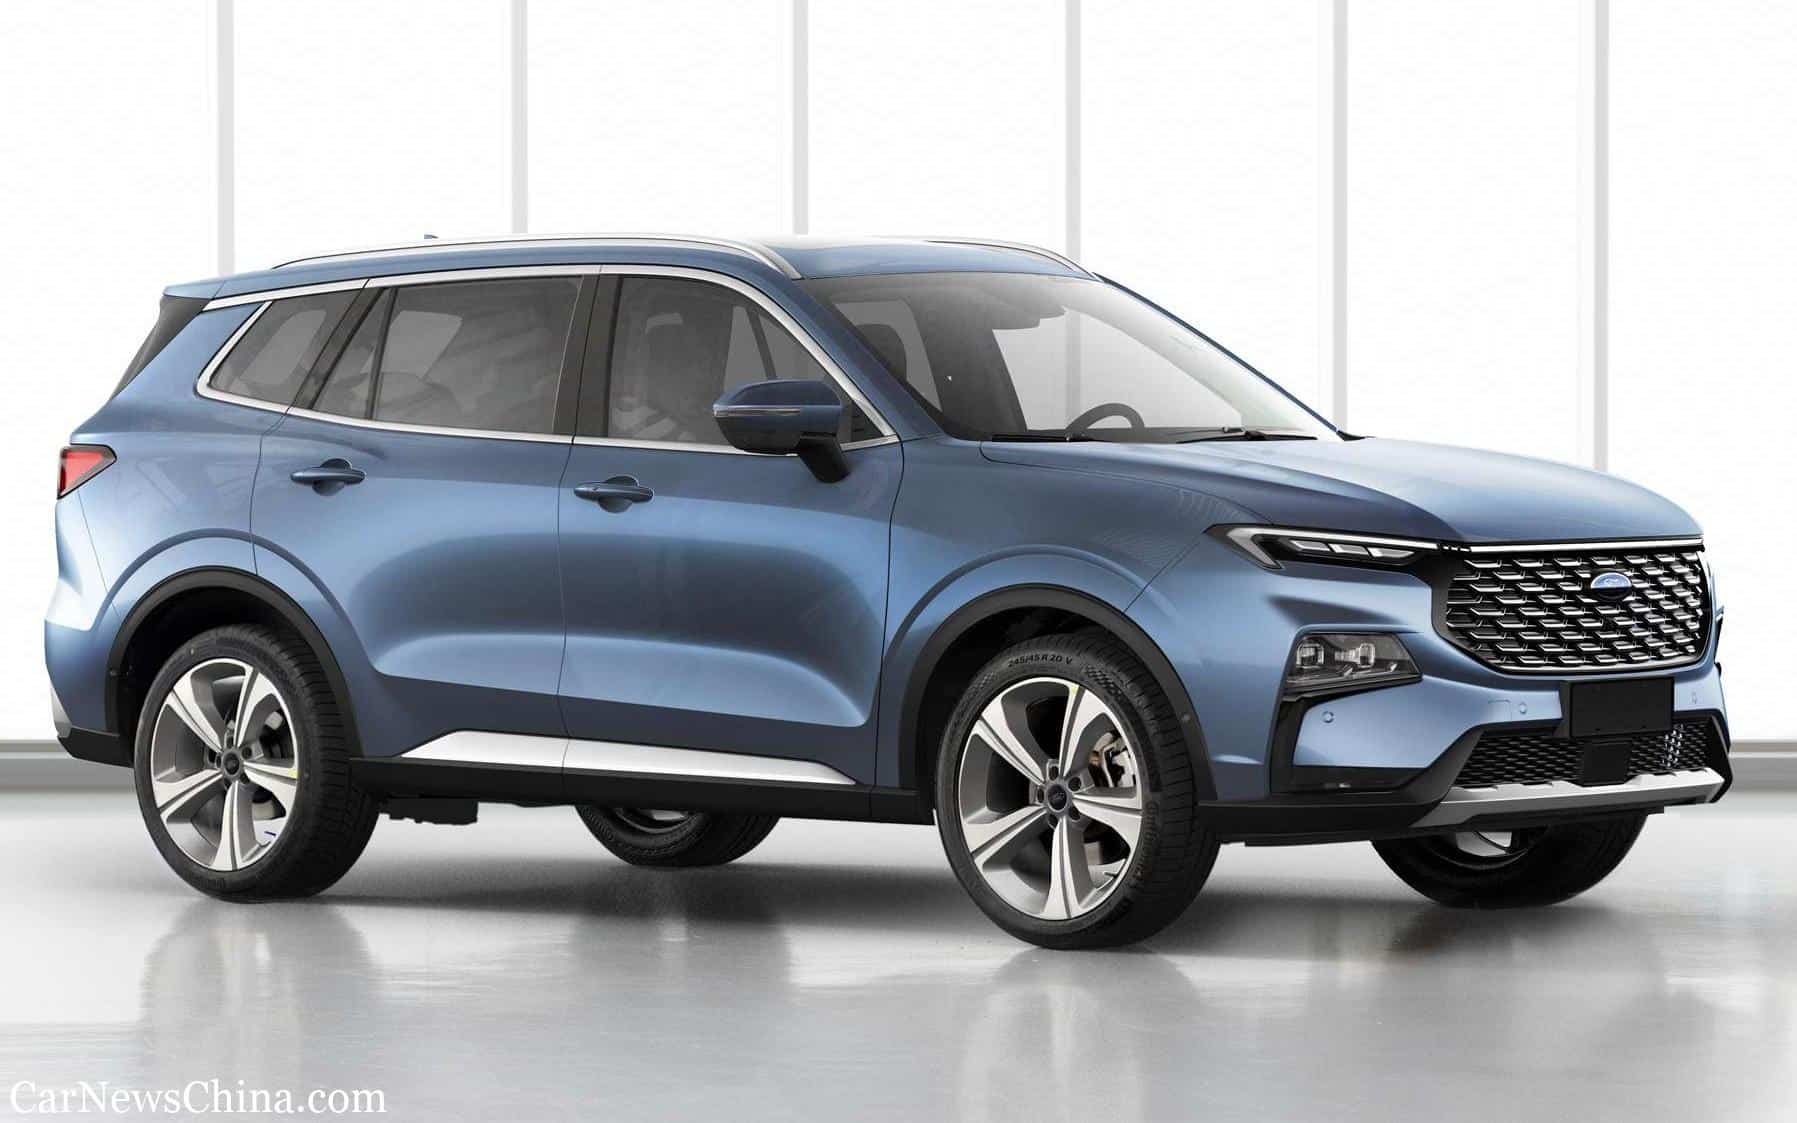 Ford Equator Sport Is A Stylish New Crossover SUV For China